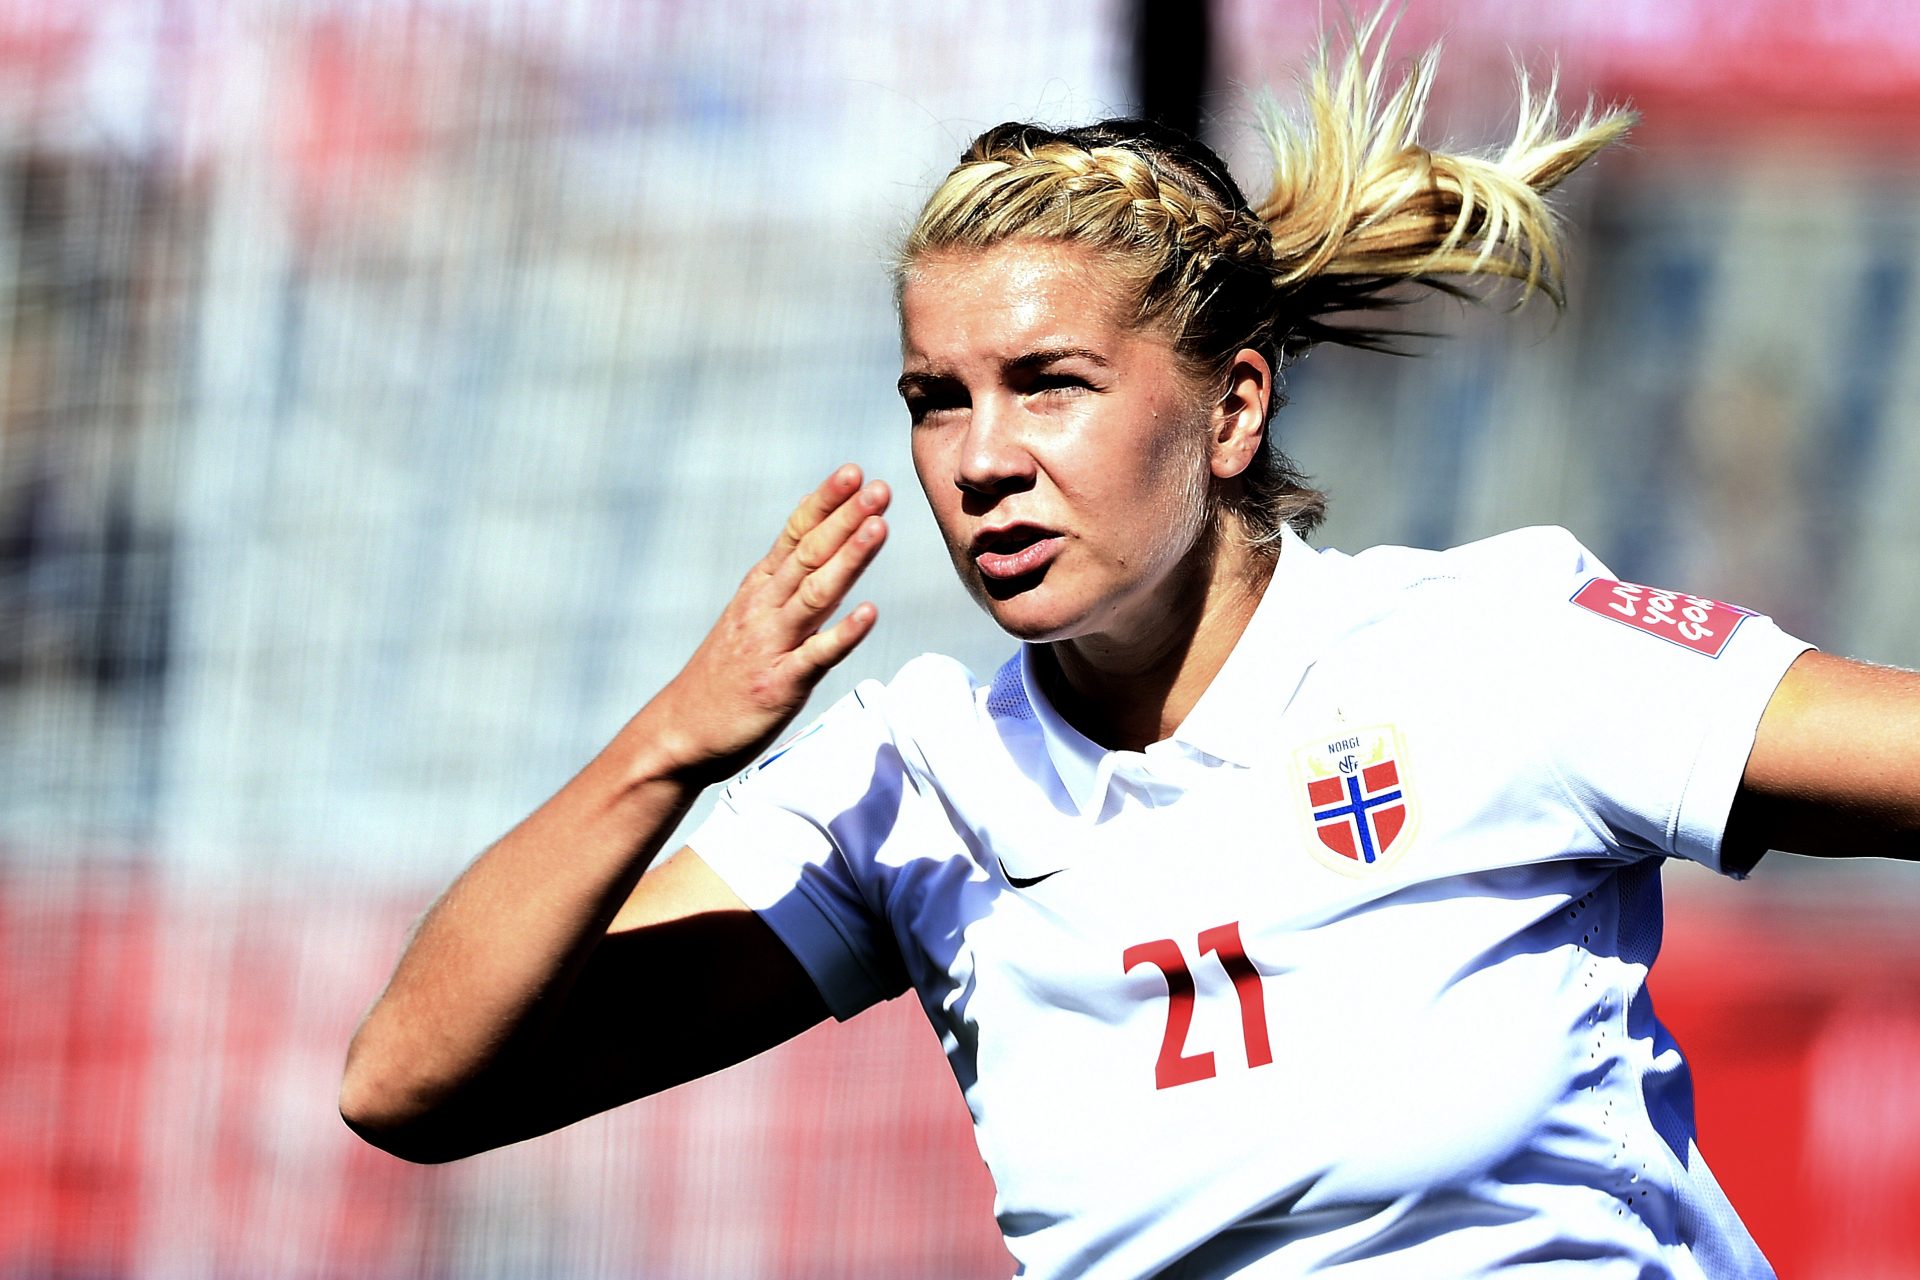 How Ada Hegerberg became one of the best female strikers of all time